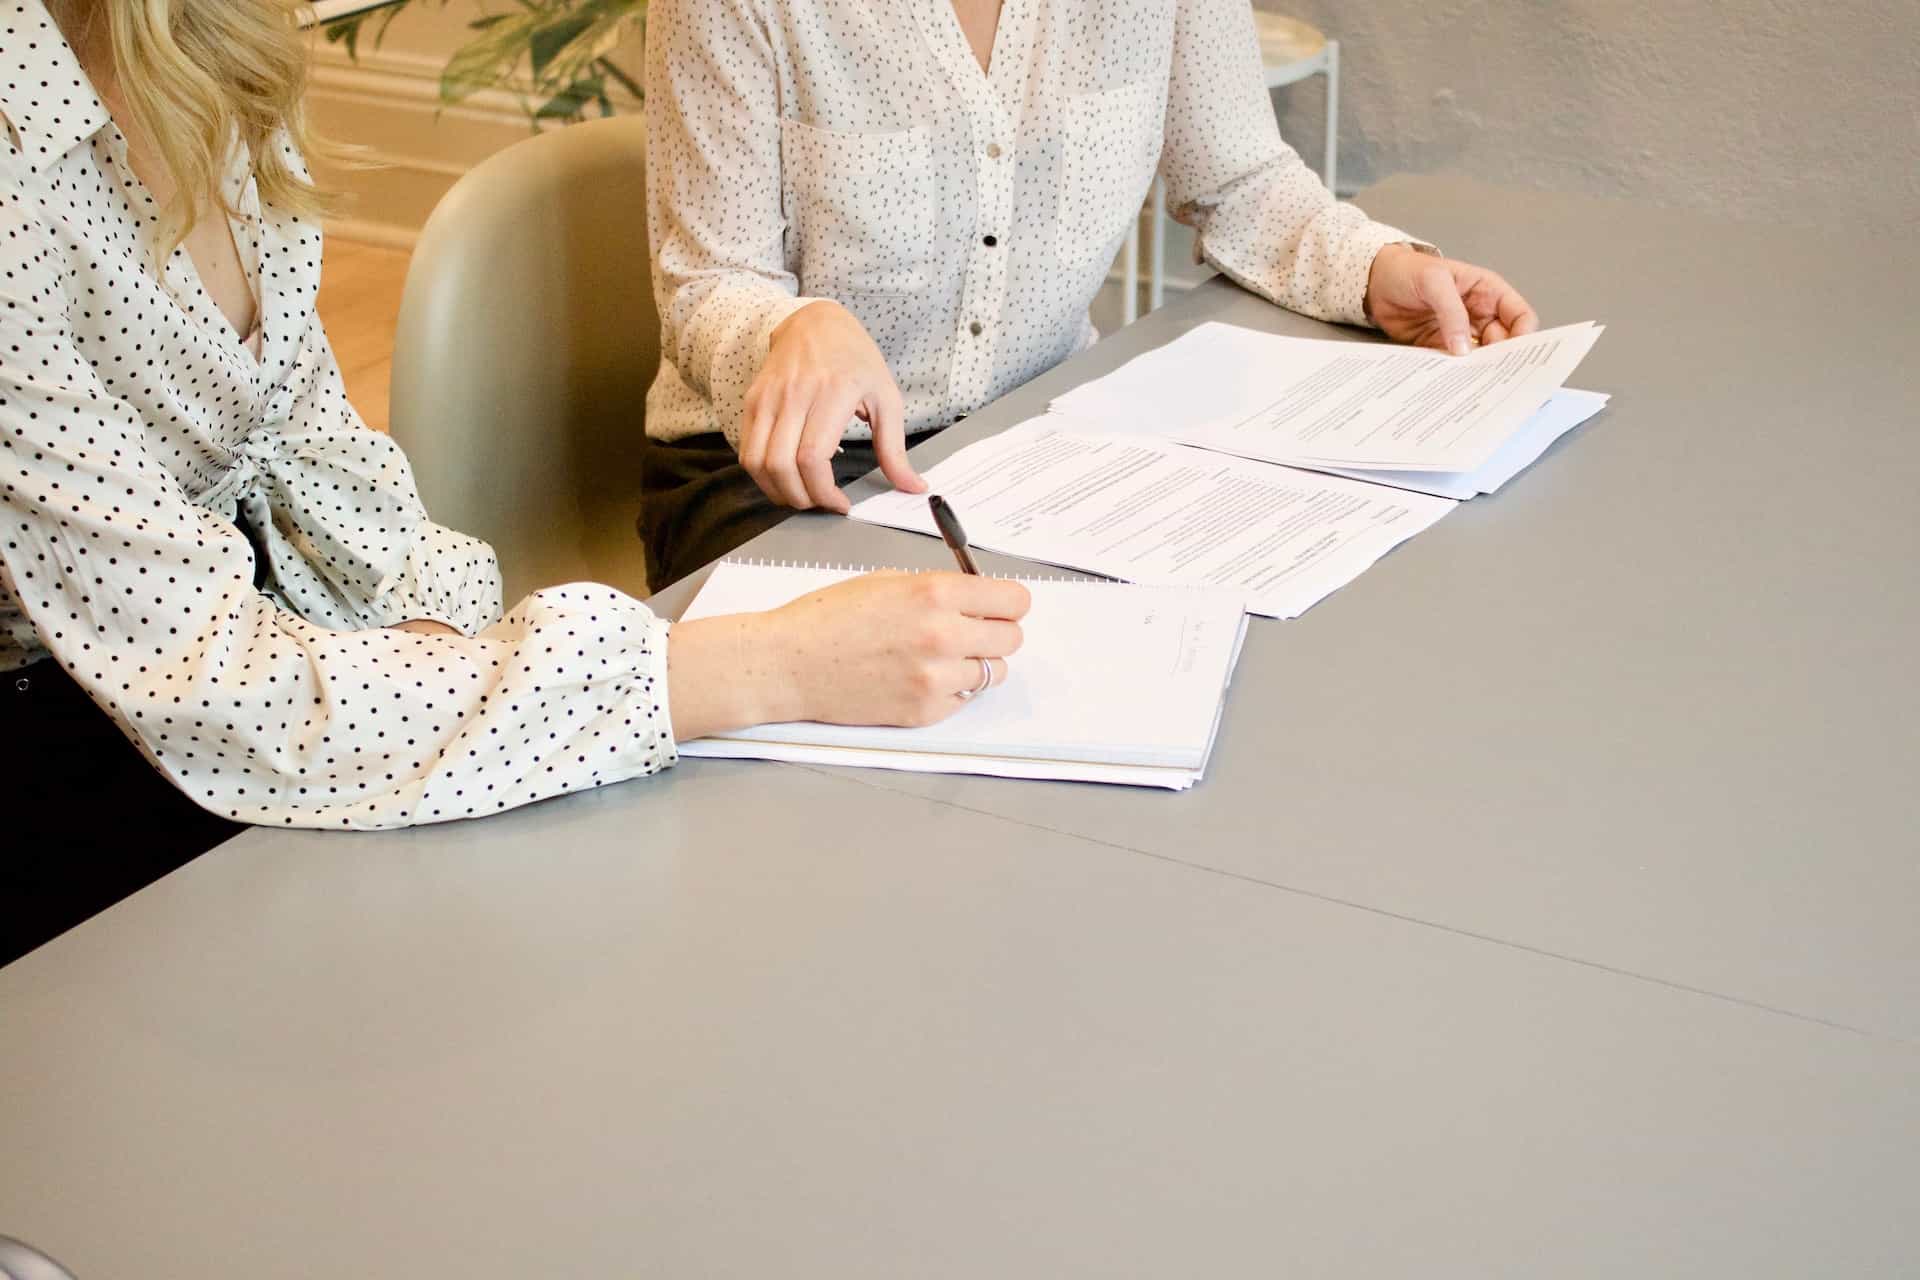 A person scribbling on white paper beside a person with documents.